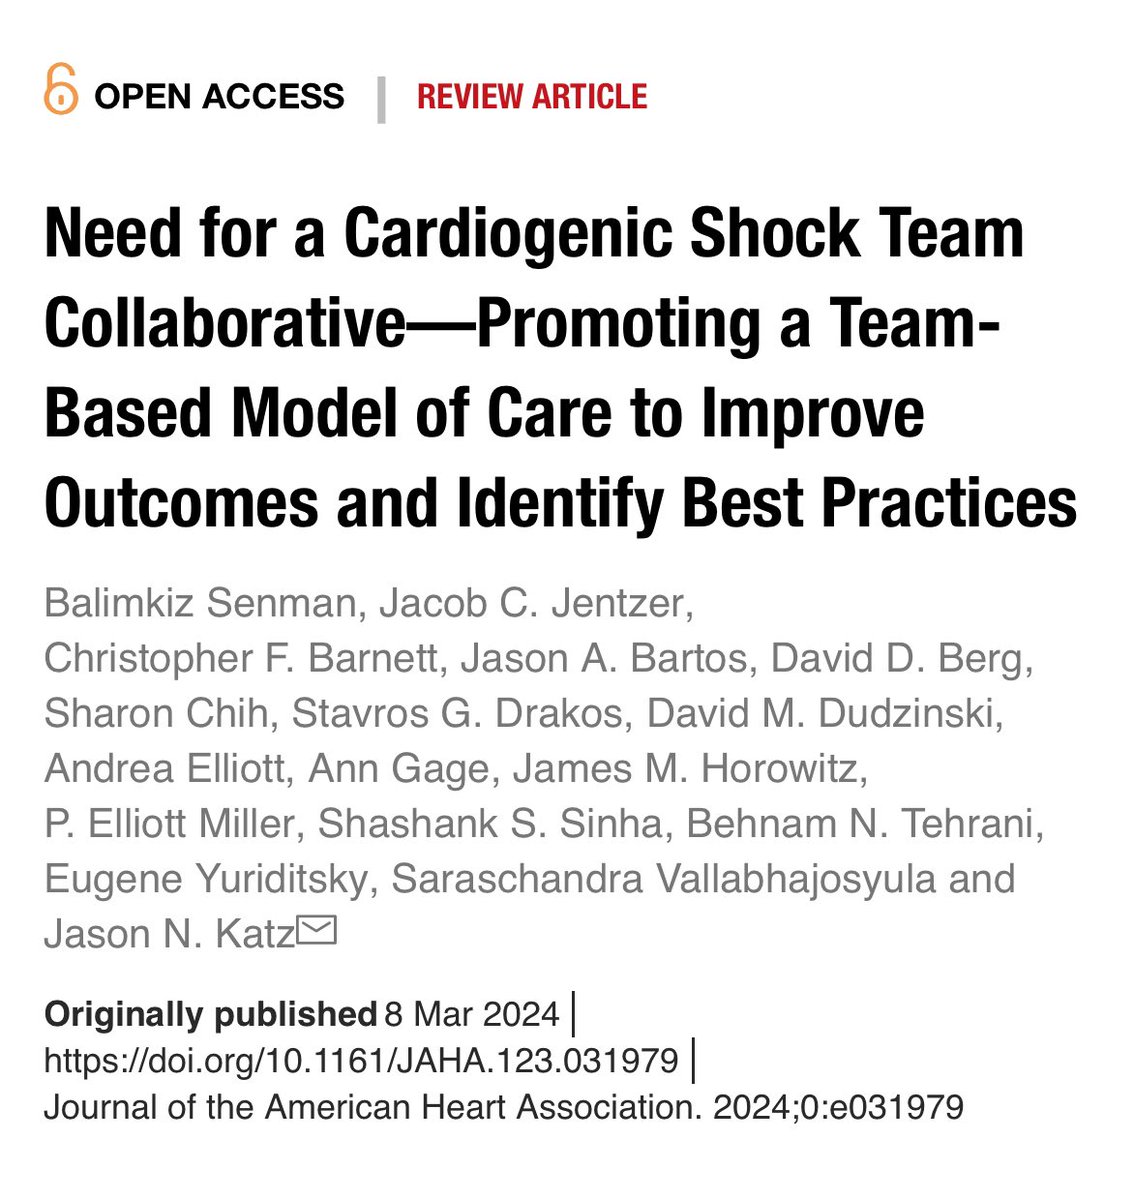 “Need for a Cardiogenic Shock⚡️🫀💥 Team Collaborative—Promoting a Team‐Based Model of Care to Improve Outcomes and Identify Best Practices”👍: ahajournals.org/doi/full/10.11……